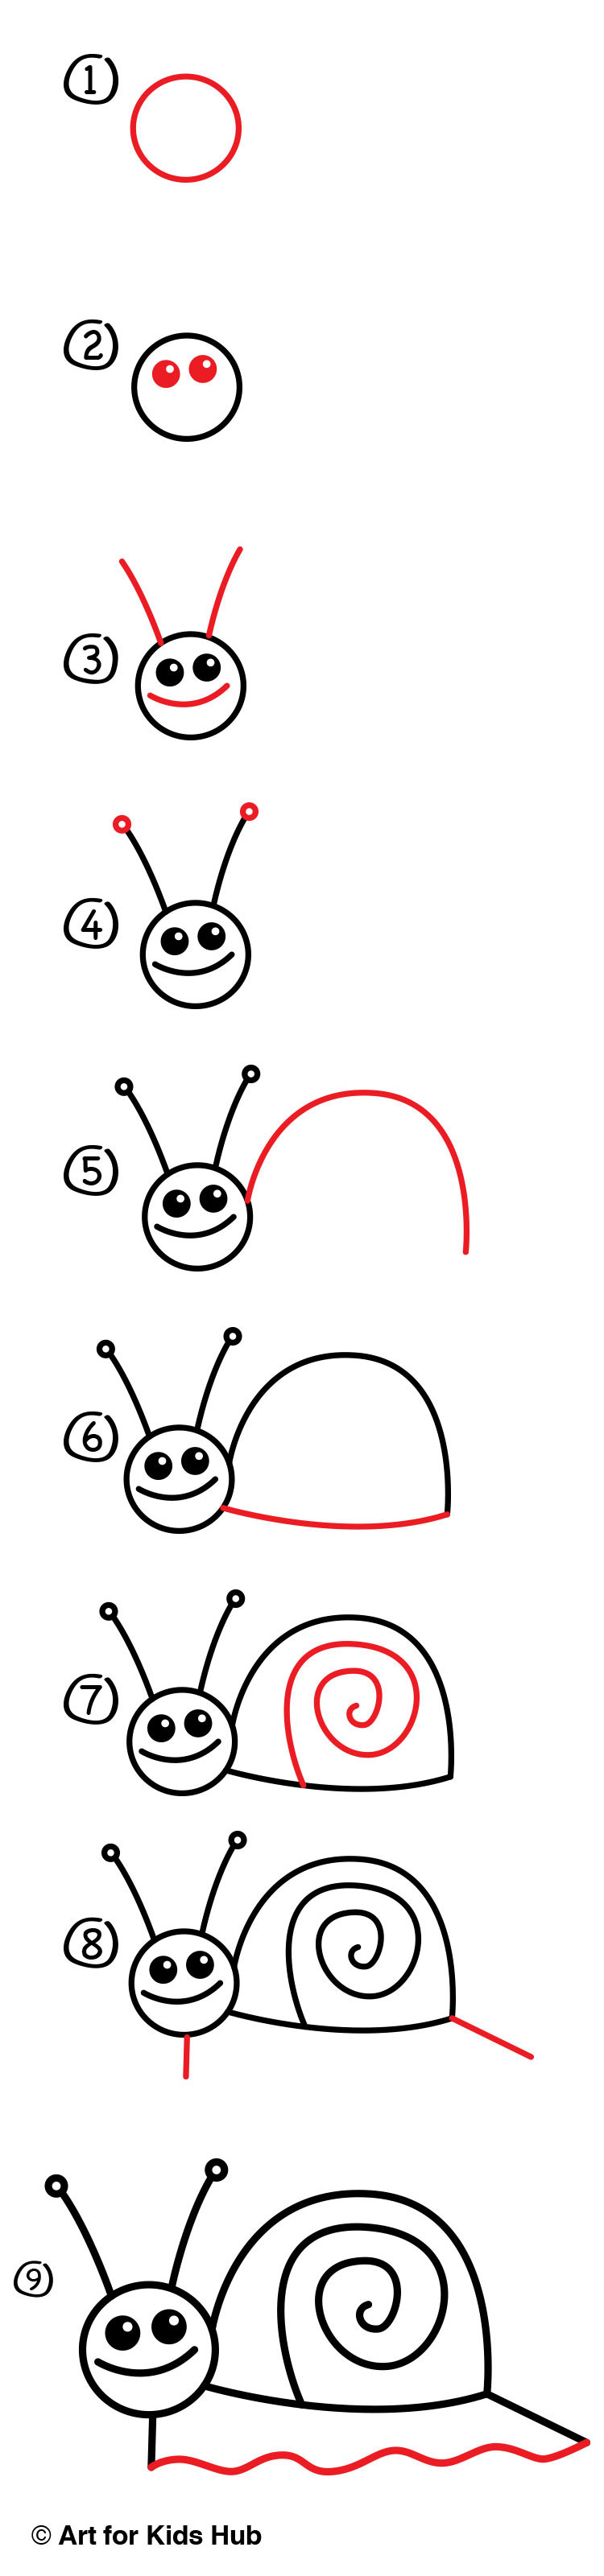 How To Draw A Snail Cute And Easy Step By Step Easy Drawings For Kids